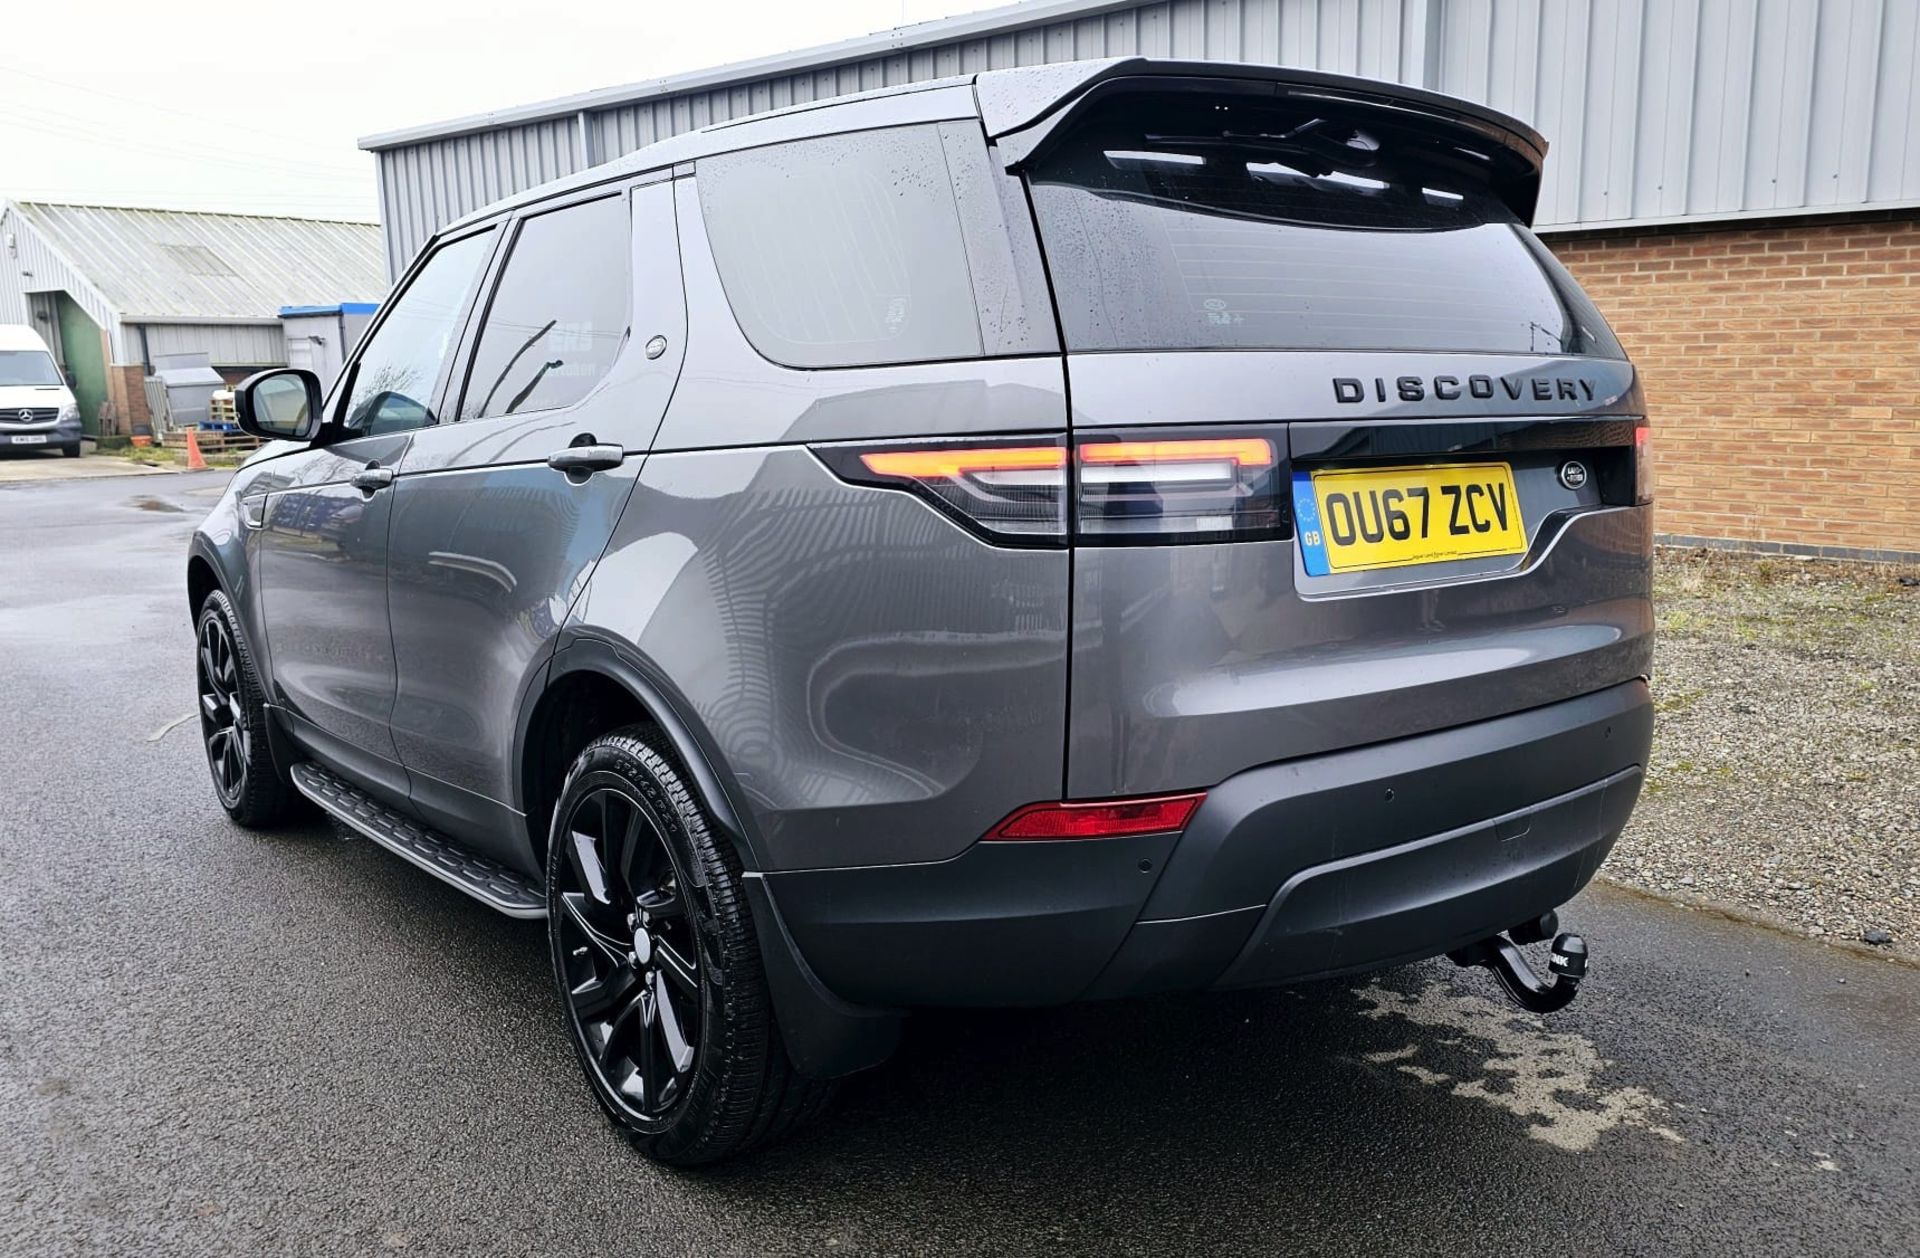 Land Rover Discovery 5 - (New Model) Diesel Auto - 2018 Model - Black Pack Edition - Sat Nav - Look - Image 11 of 45